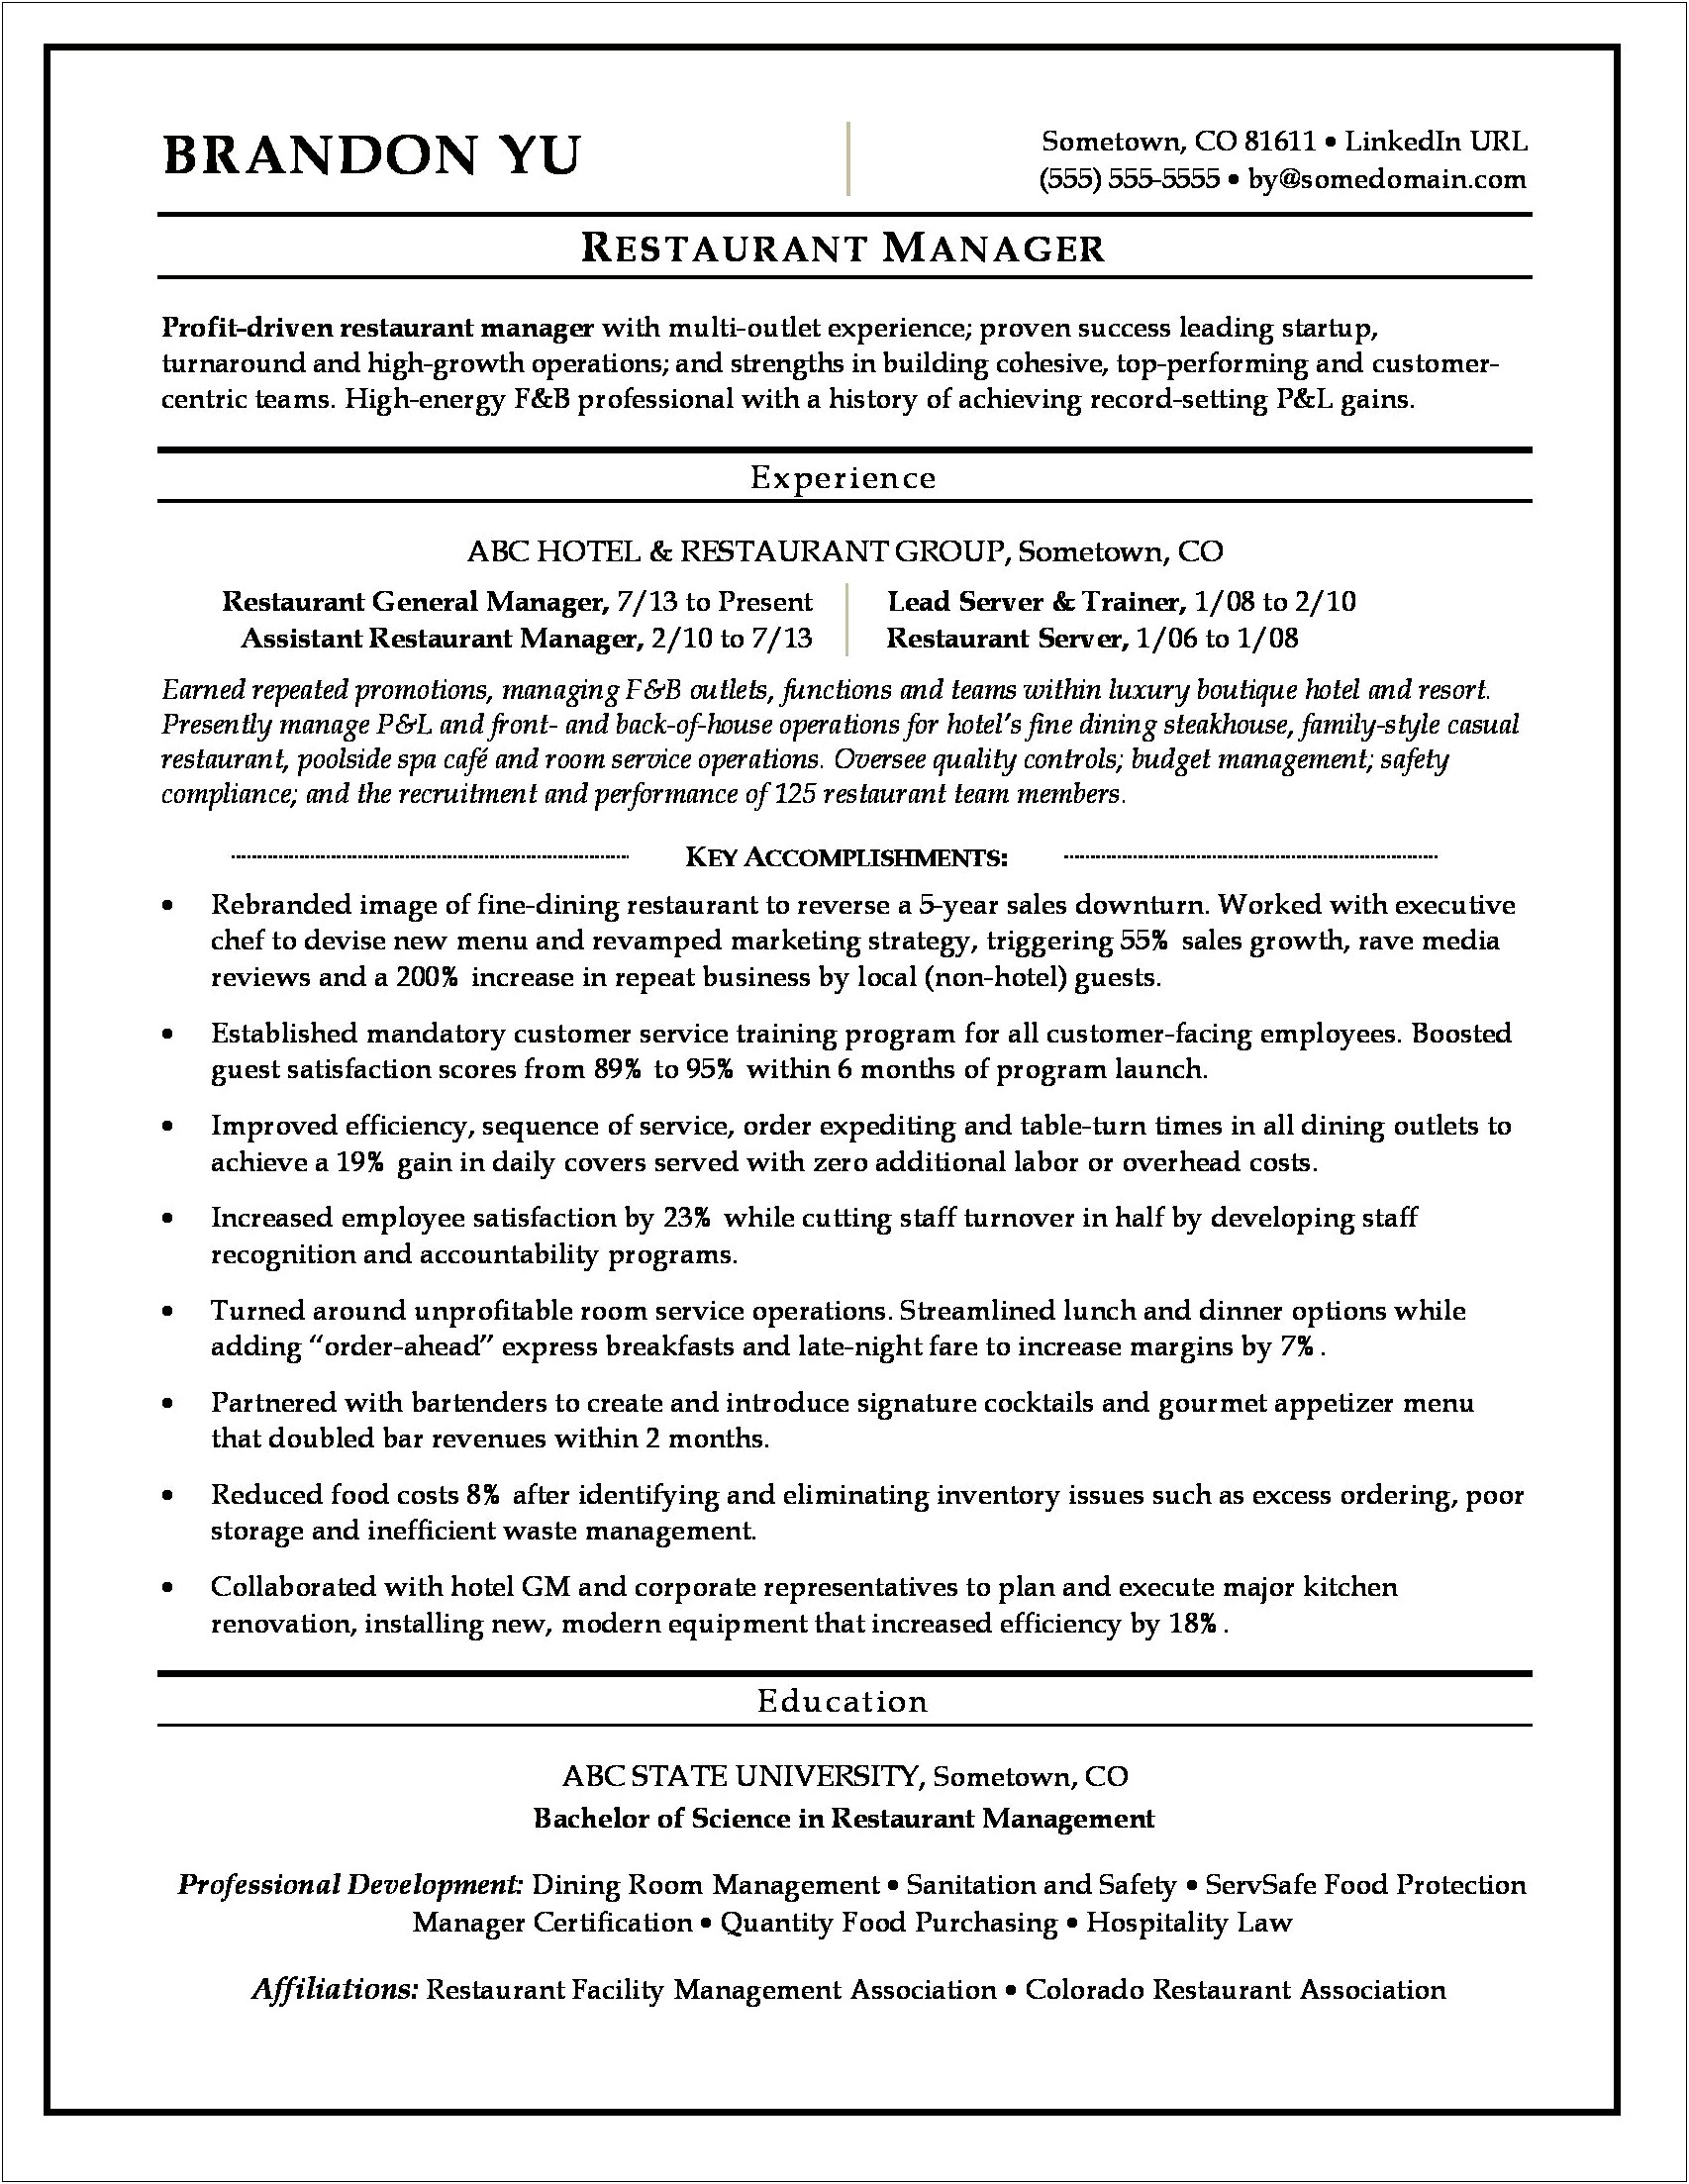 Experience Manager Job Description For Resume